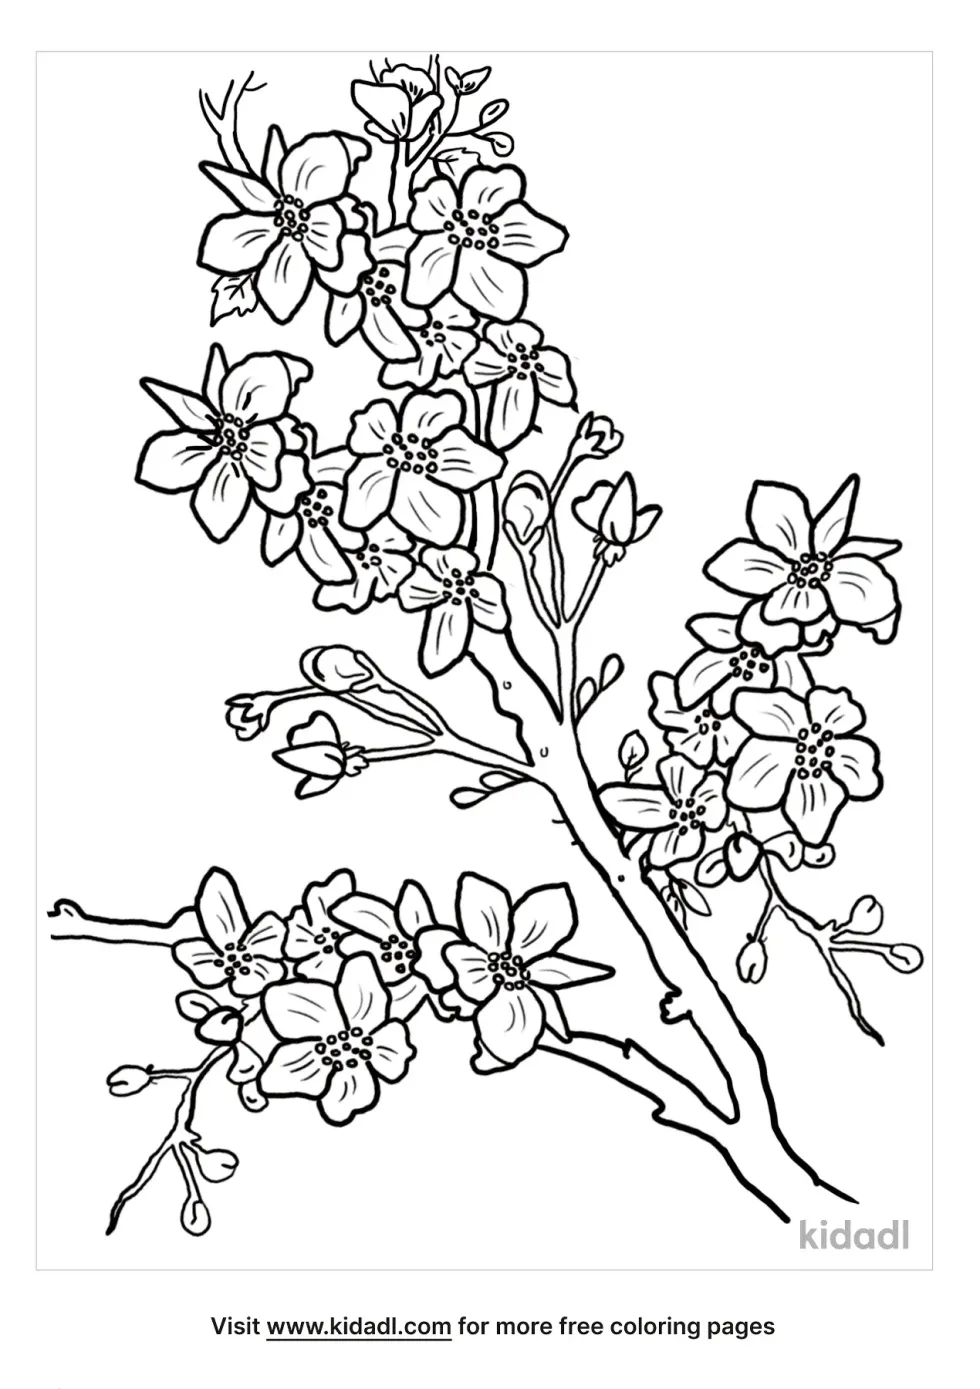 Apple Blossom Coloring Page